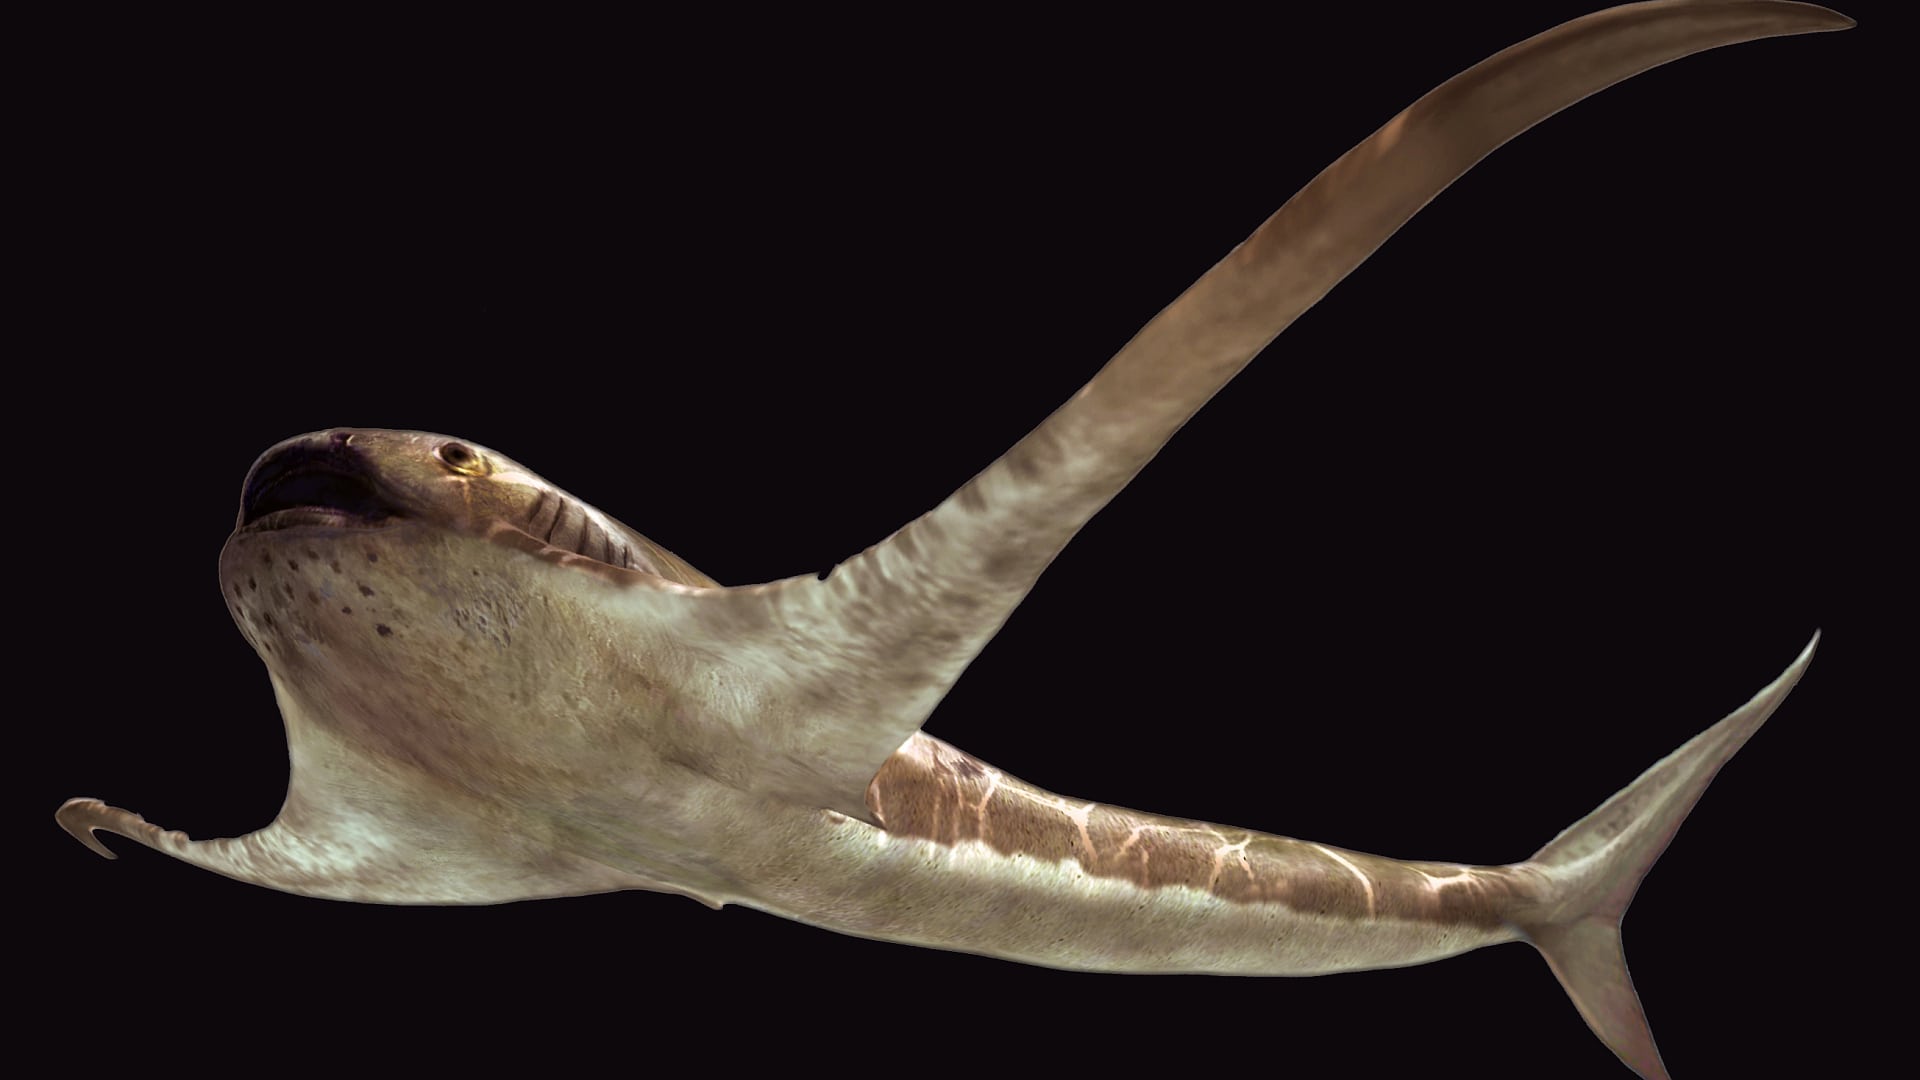 The fossil shark flew under the water like a ray